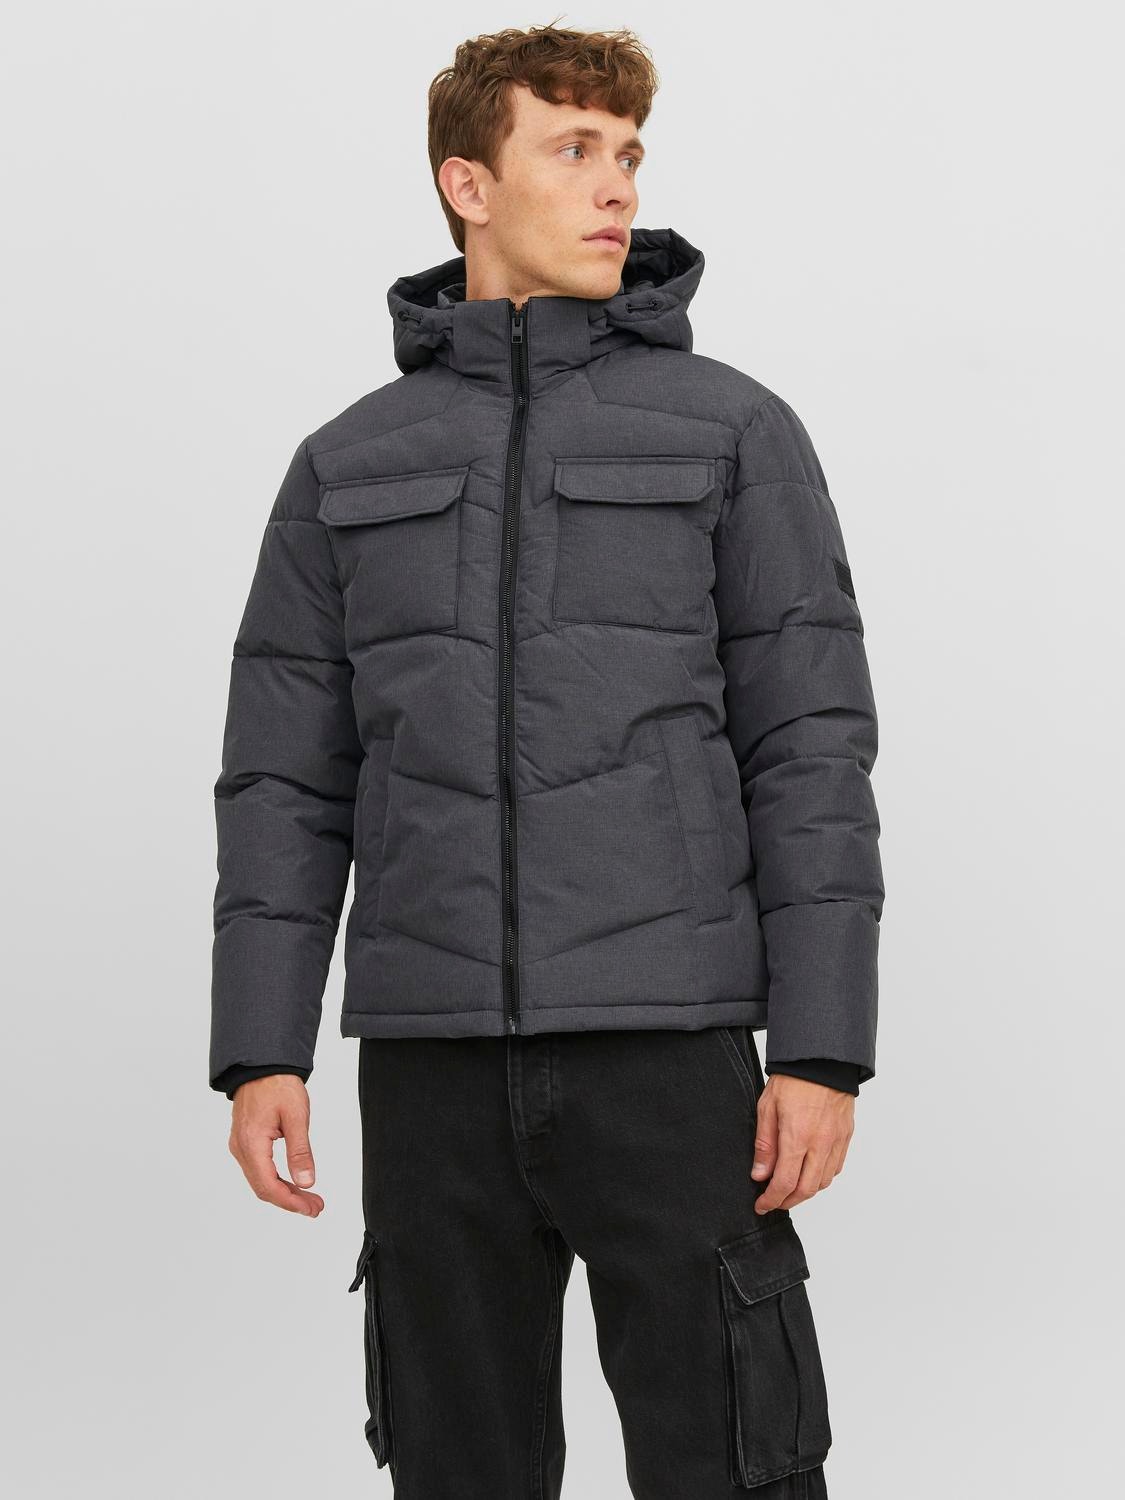 Puffer jacket with 30% discount!